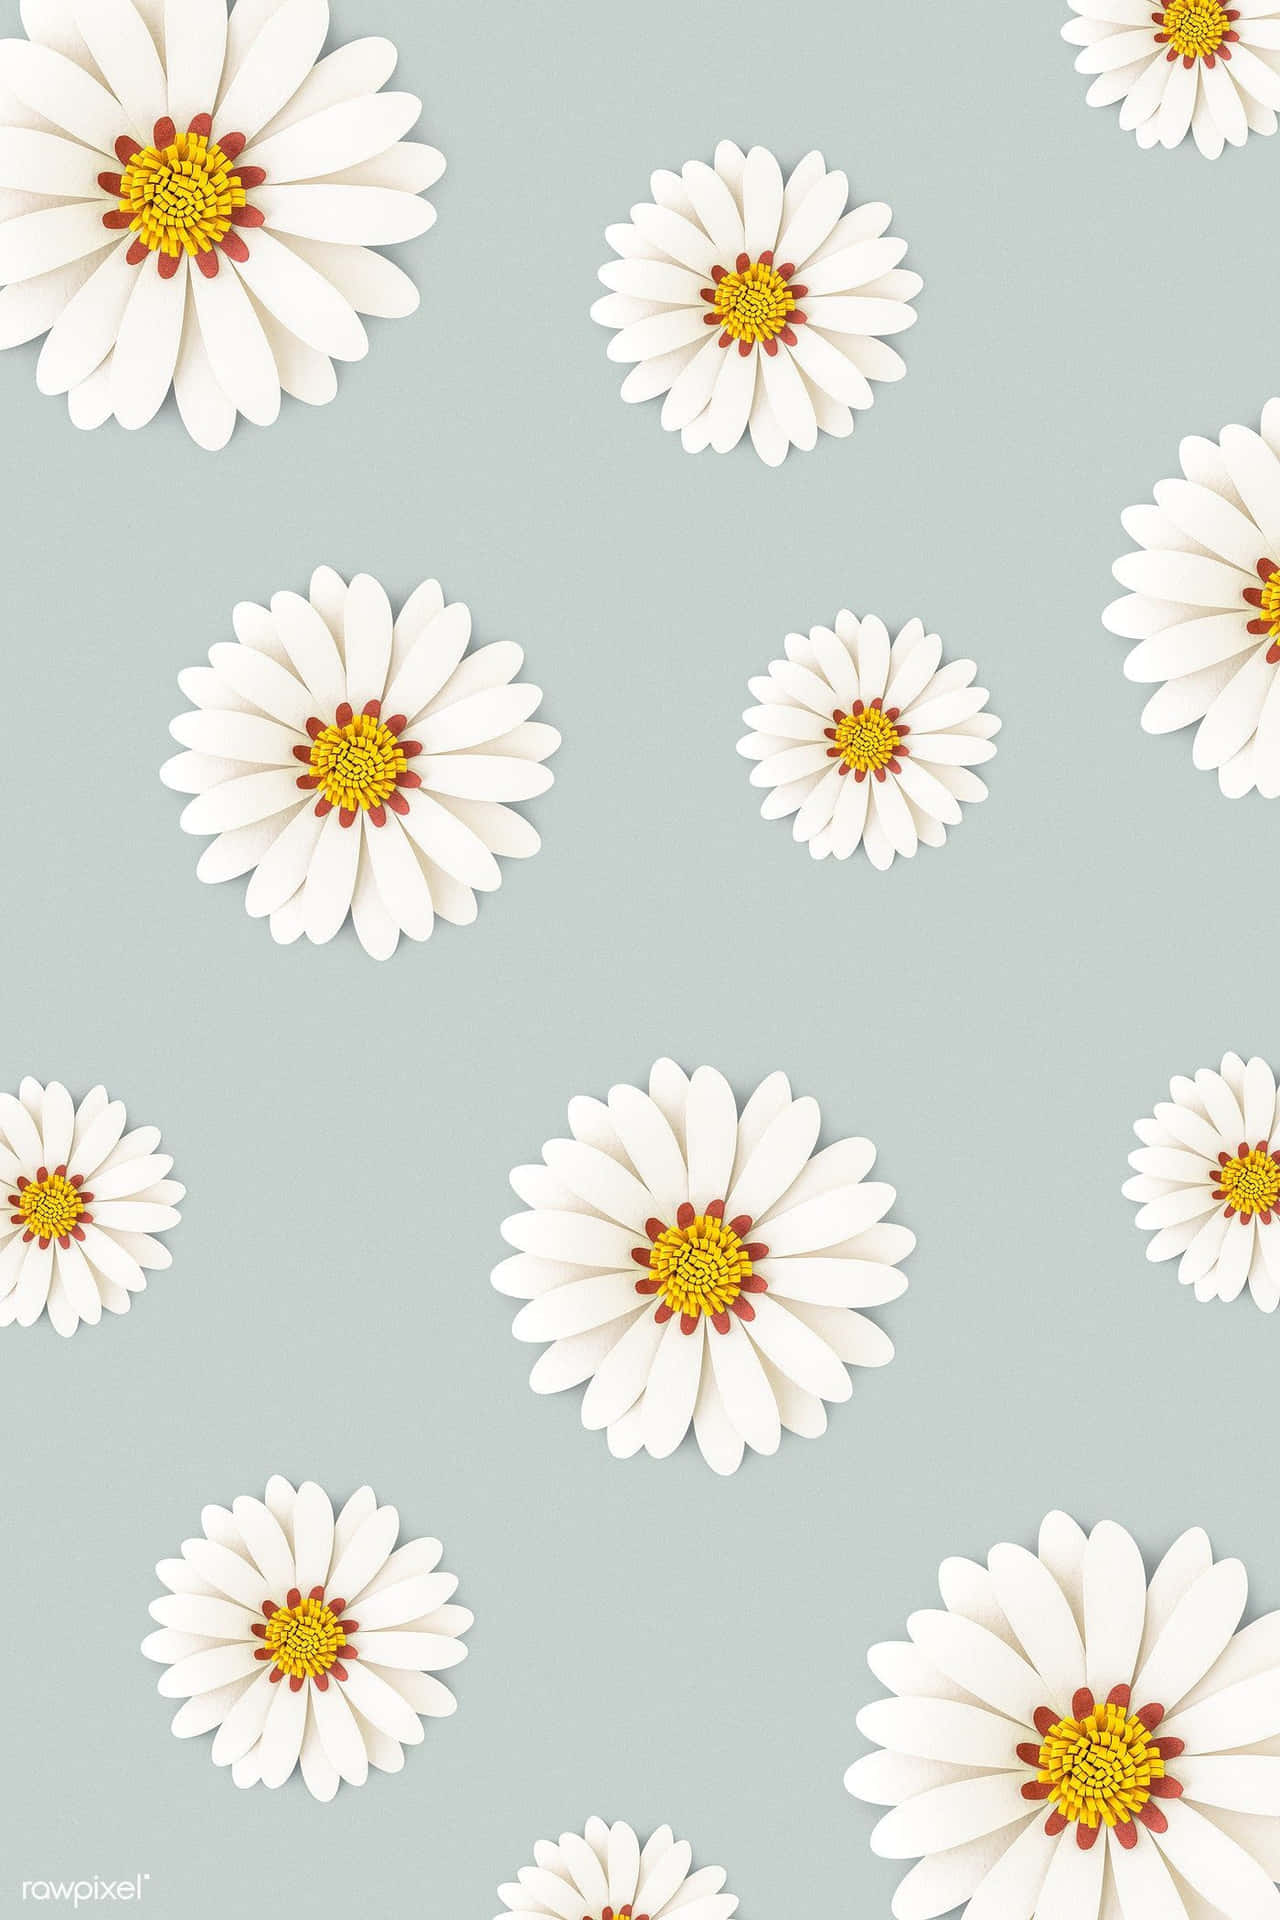 Download "A mesmerizing daisy in hues of yellow and white blooming in